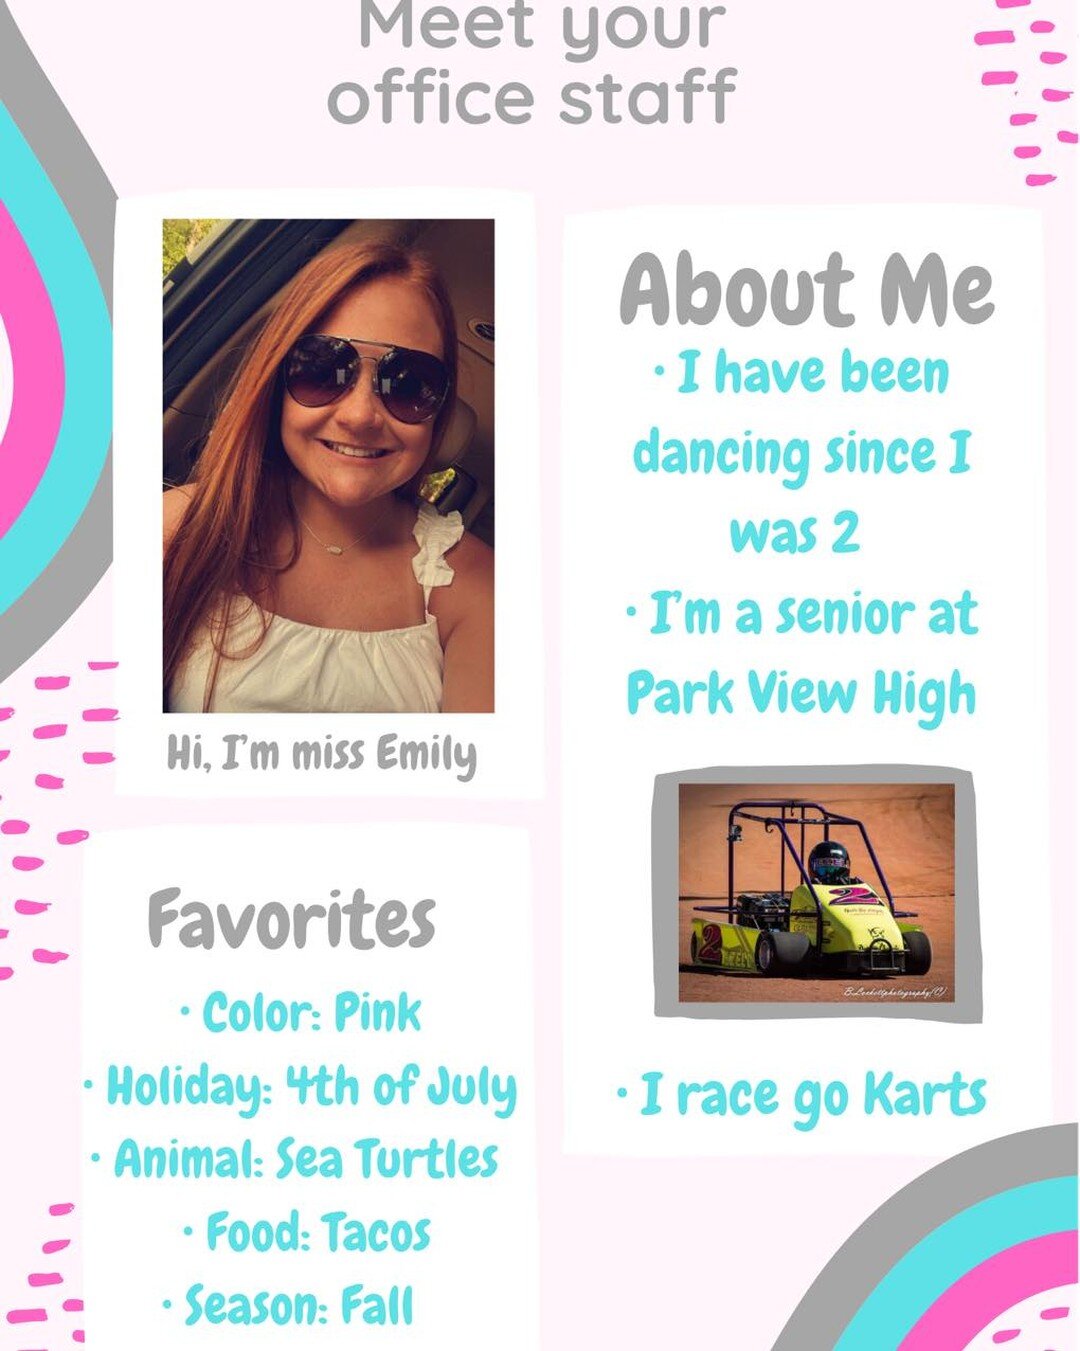 Our staff is so excited to meet you but, we want you to meet them! Next up is Miss Emily! She is our office staff at Flip it Out. She keeps everything organized and welcomes everyone in! 
.
.
www.flipitoutva.com